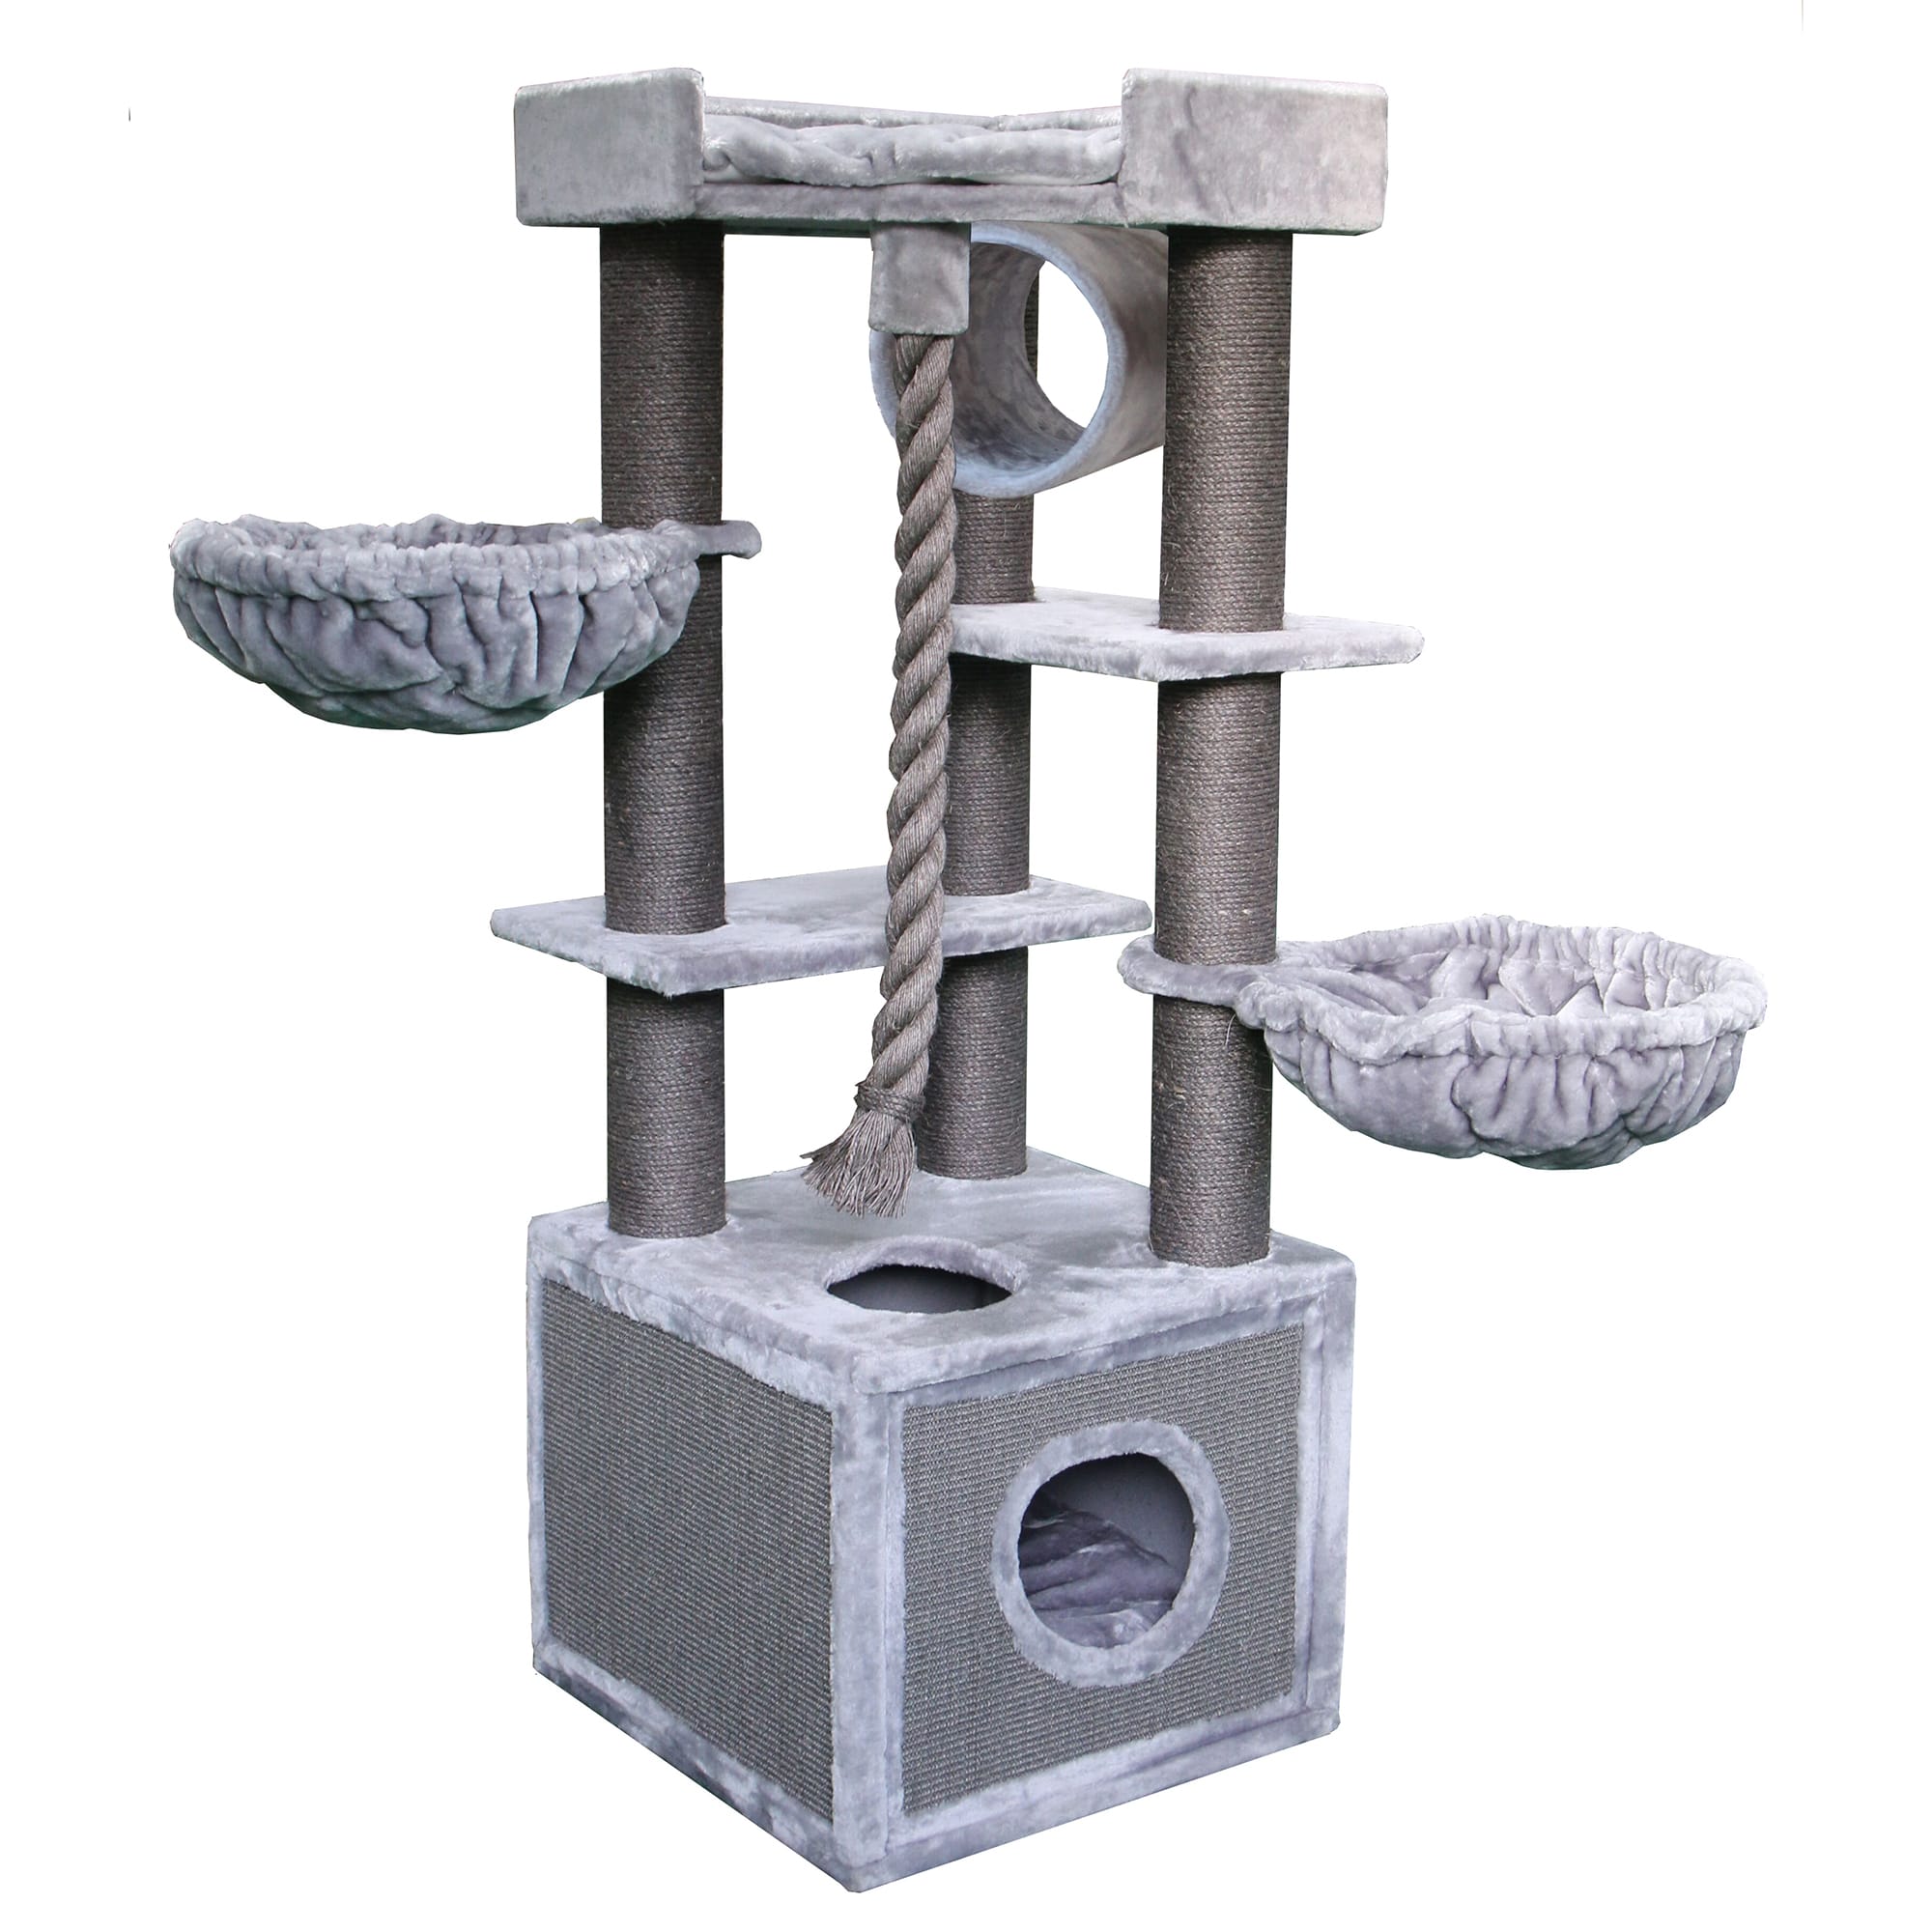 kitty mansions cat tree